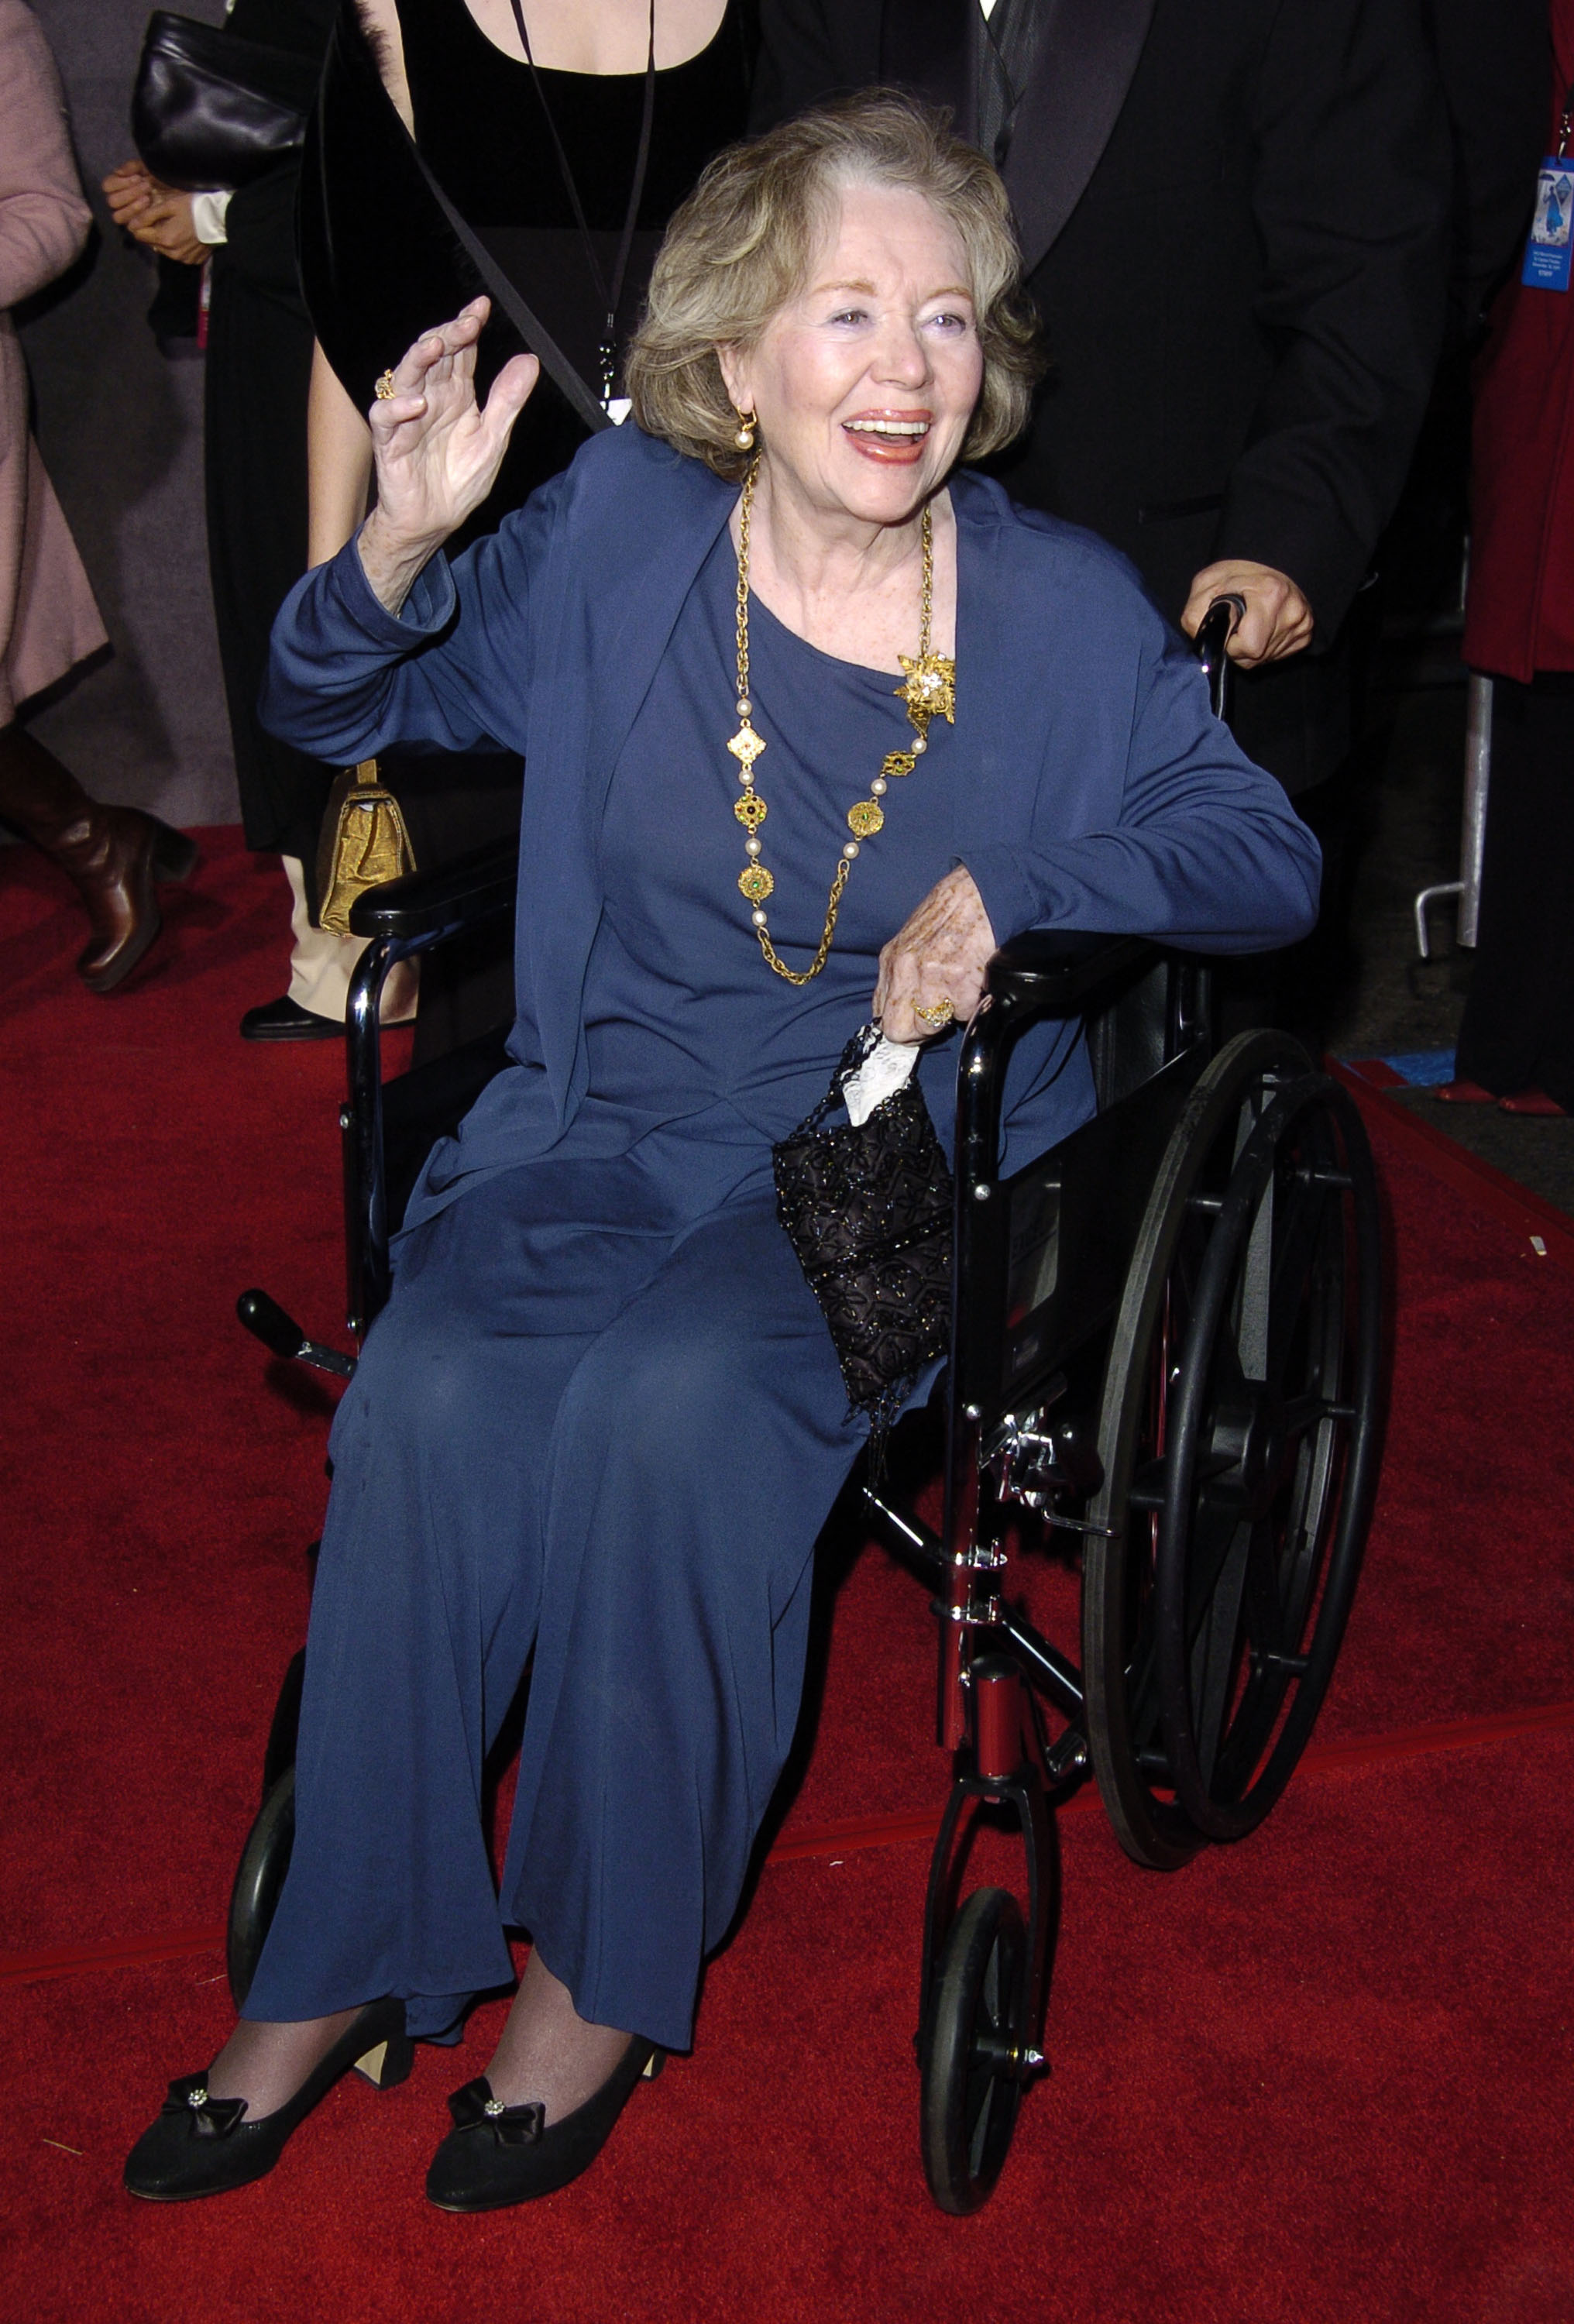 Glynis Johns auf der Disney "Mary Poppins" 40th Anniversary Edition DVD Launch Party in Los Angeles, Kalifornien am 30. November 2004 | Quelle: Getty Images